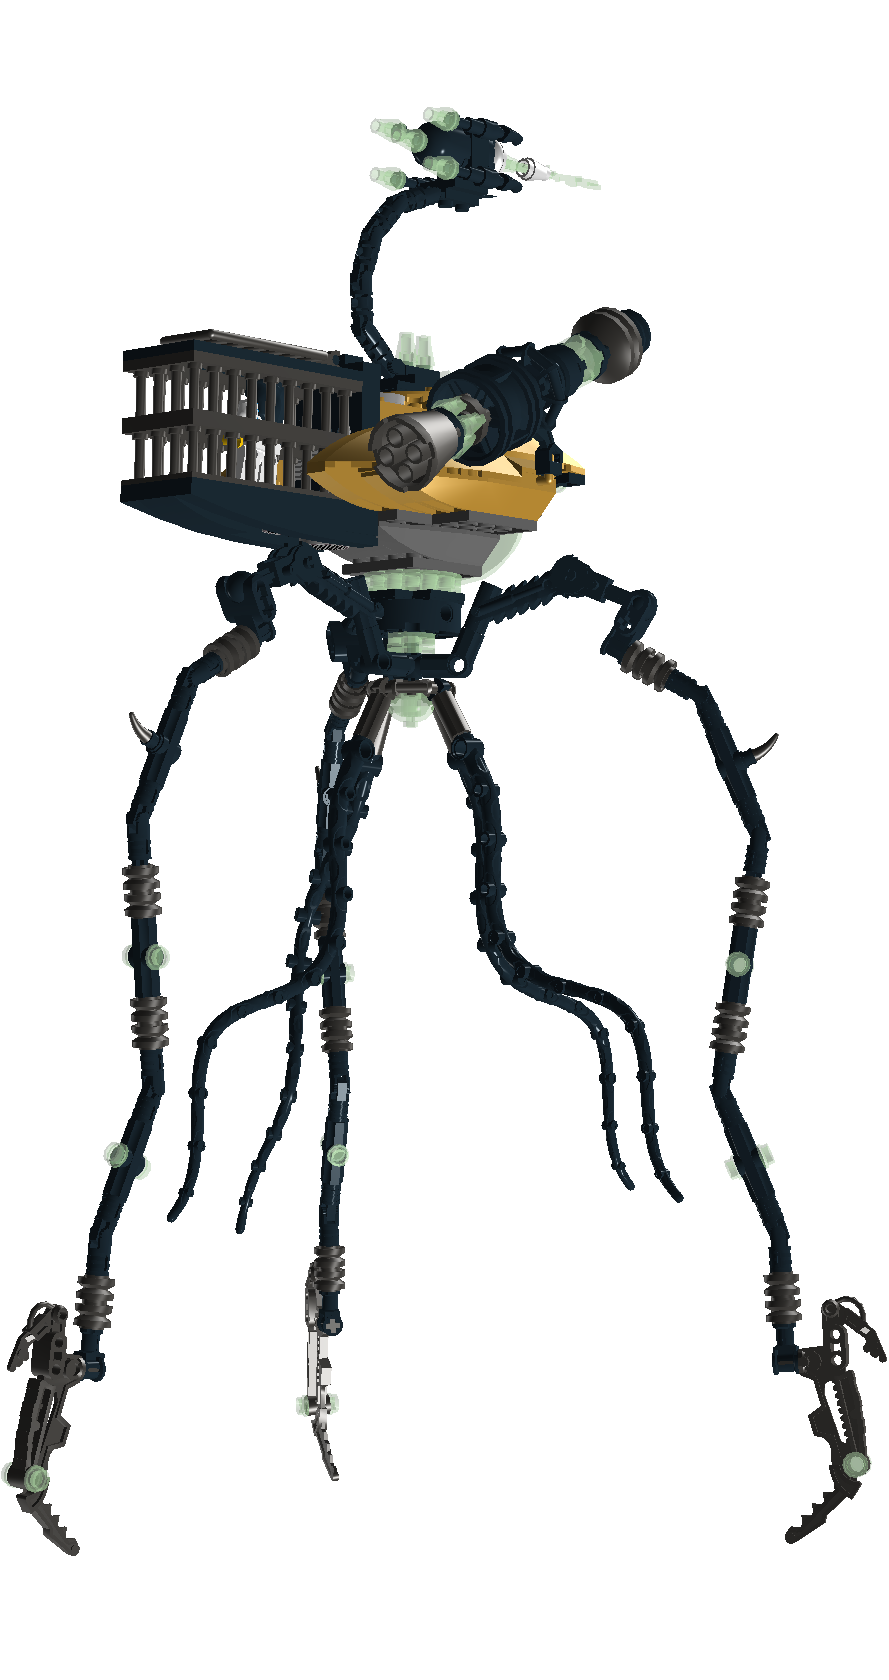 LEGO War Of The Worlds Tripods By Bathroomghost On DeviantArt | vlr.eng.br